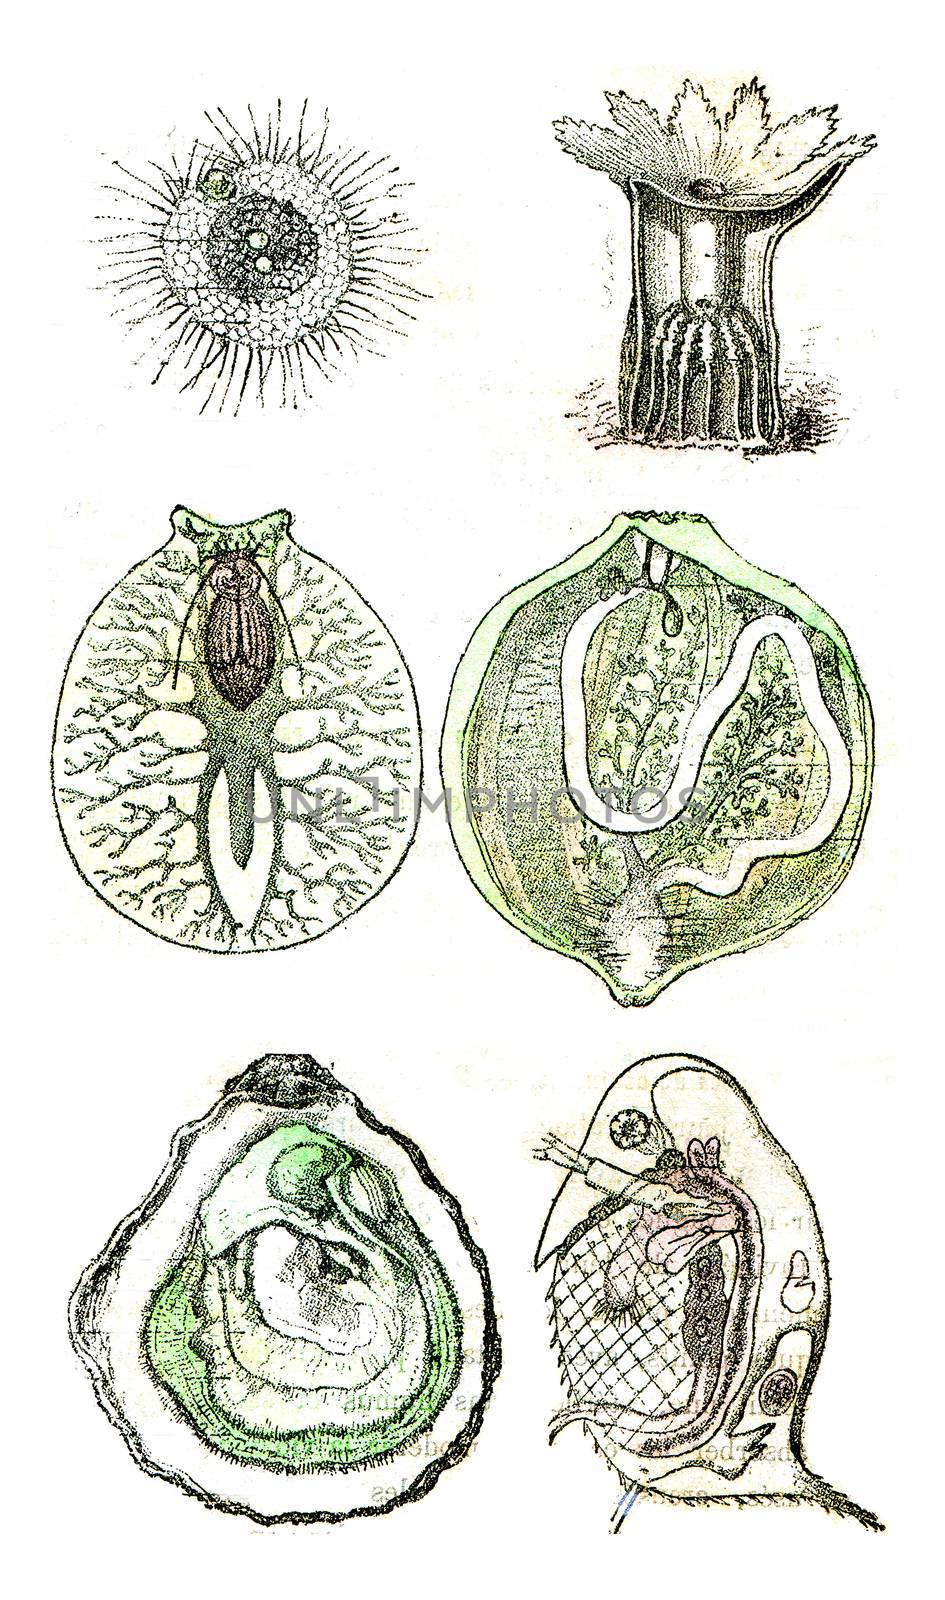 Comparative organization of invertebrate animals currently alive or represented in the primitive period by many species
